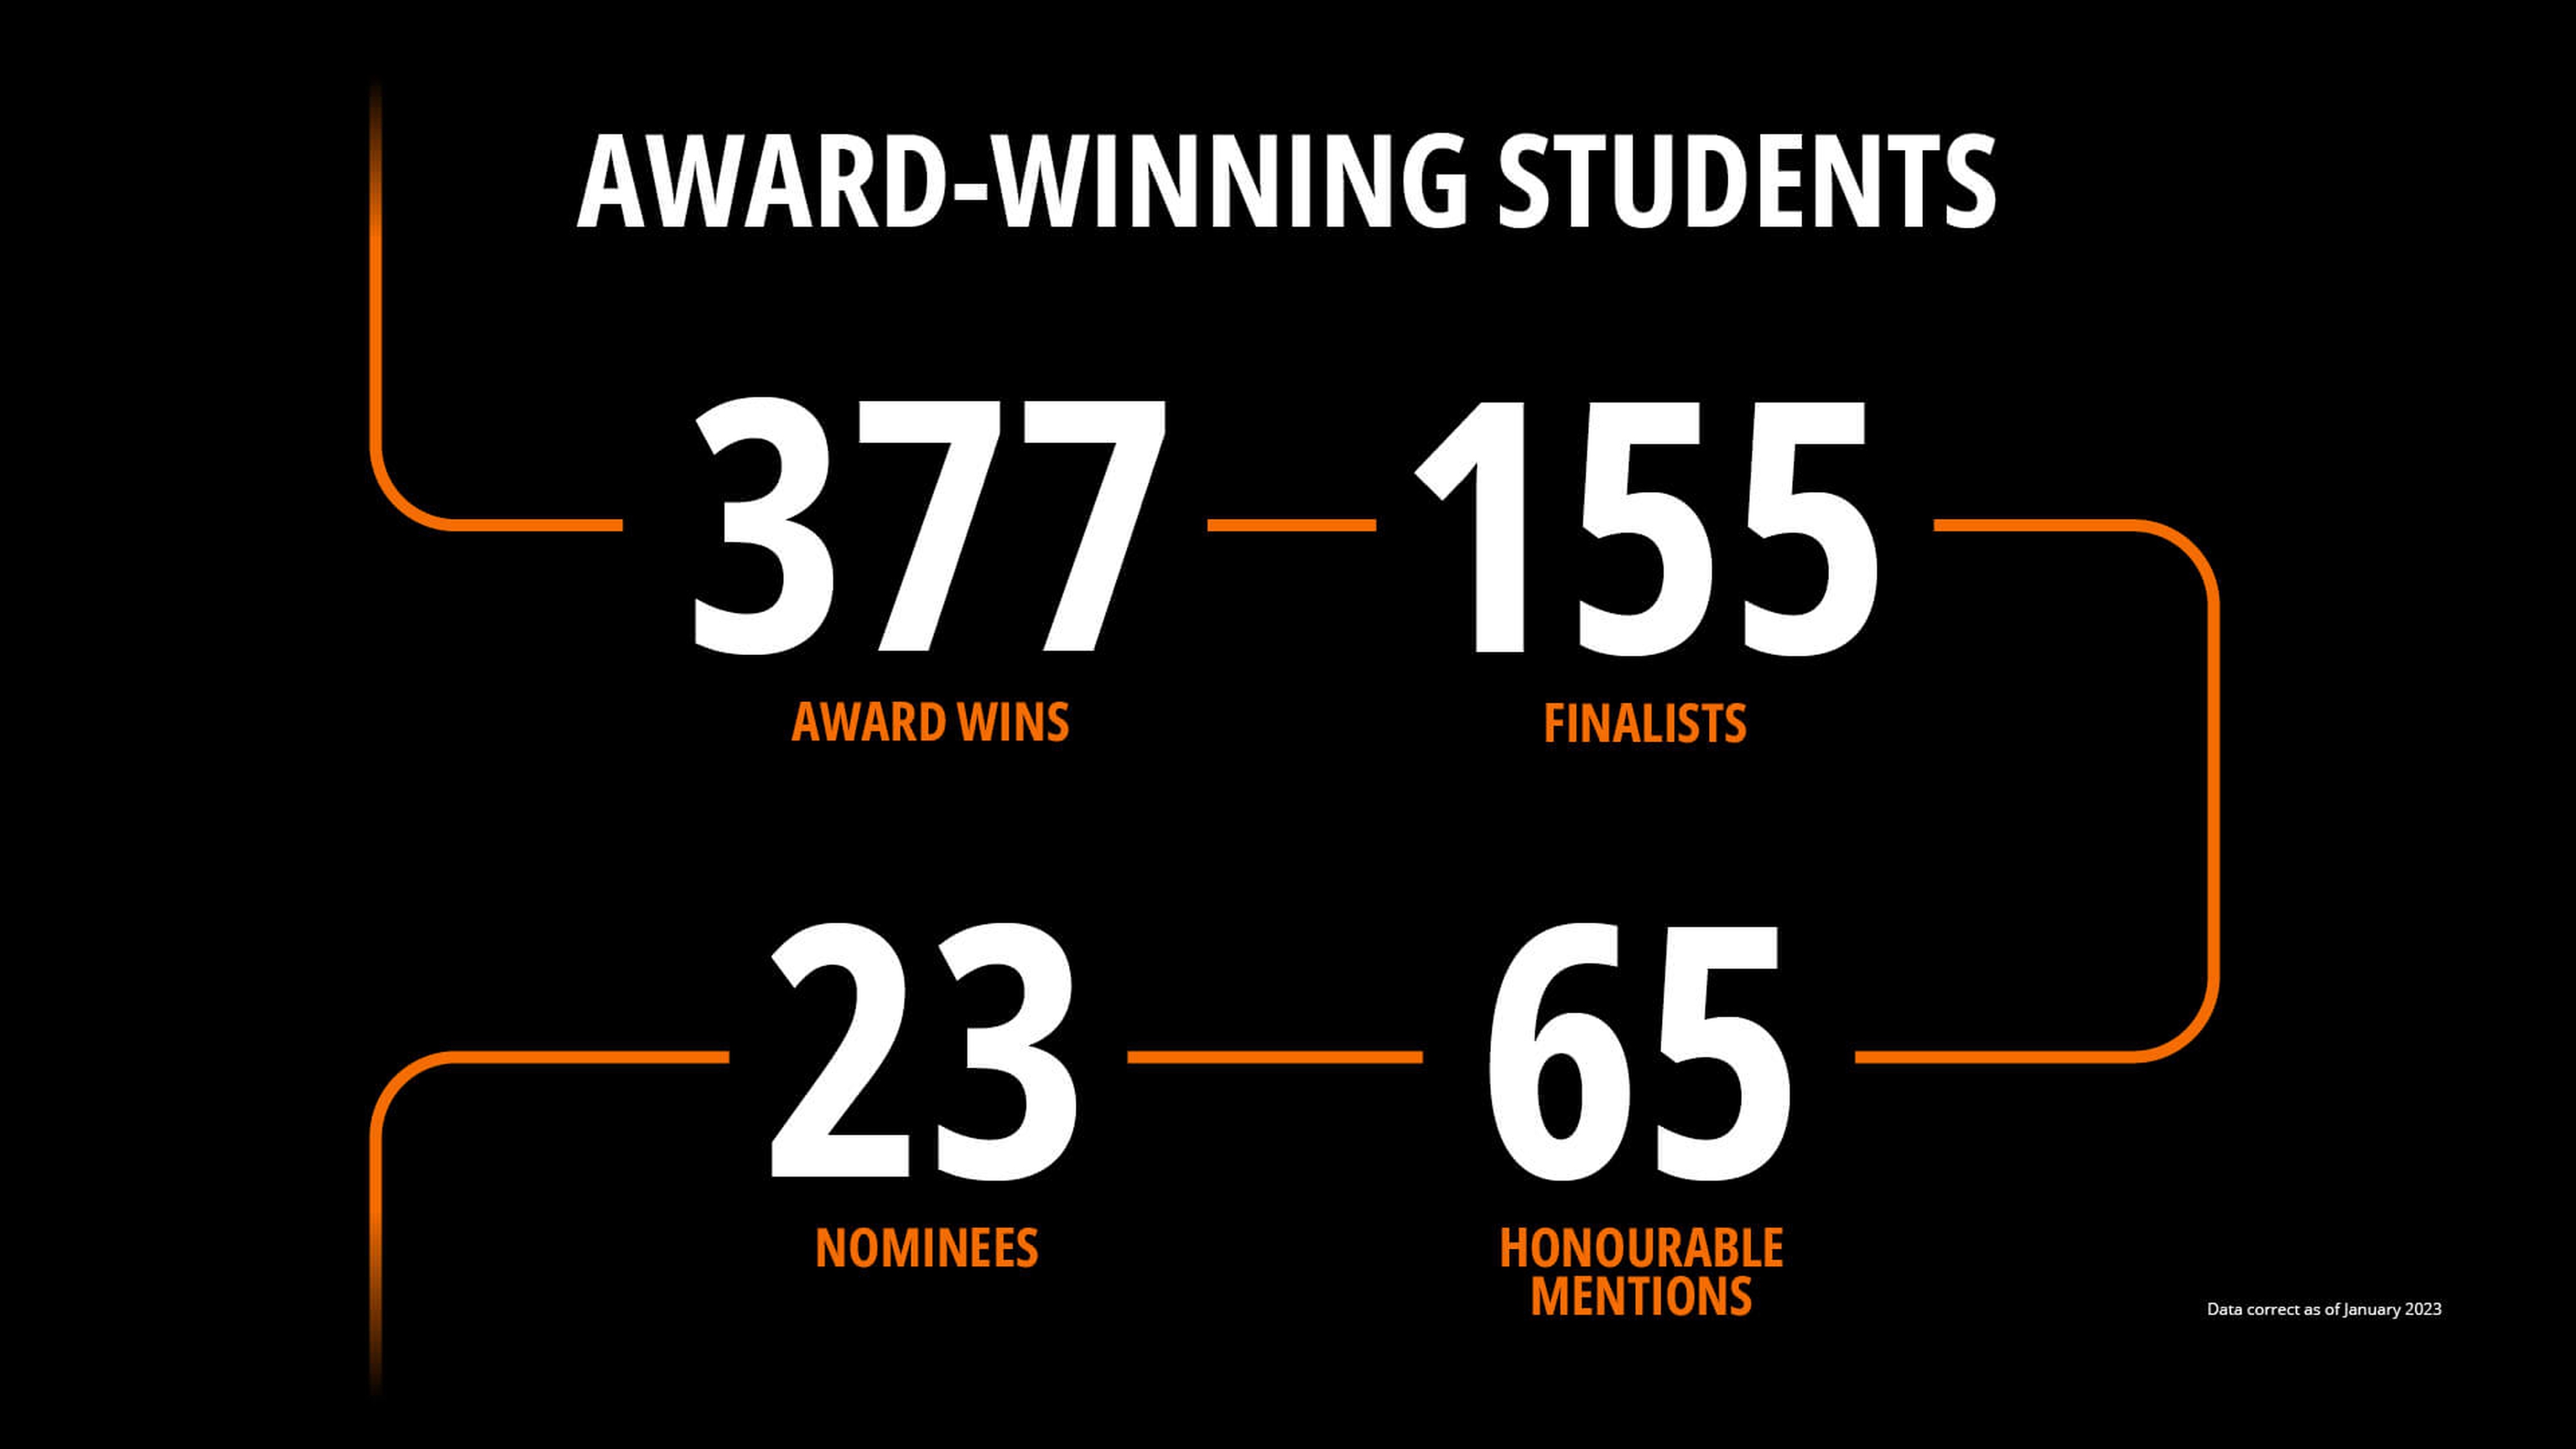 Infographic with student award statistics